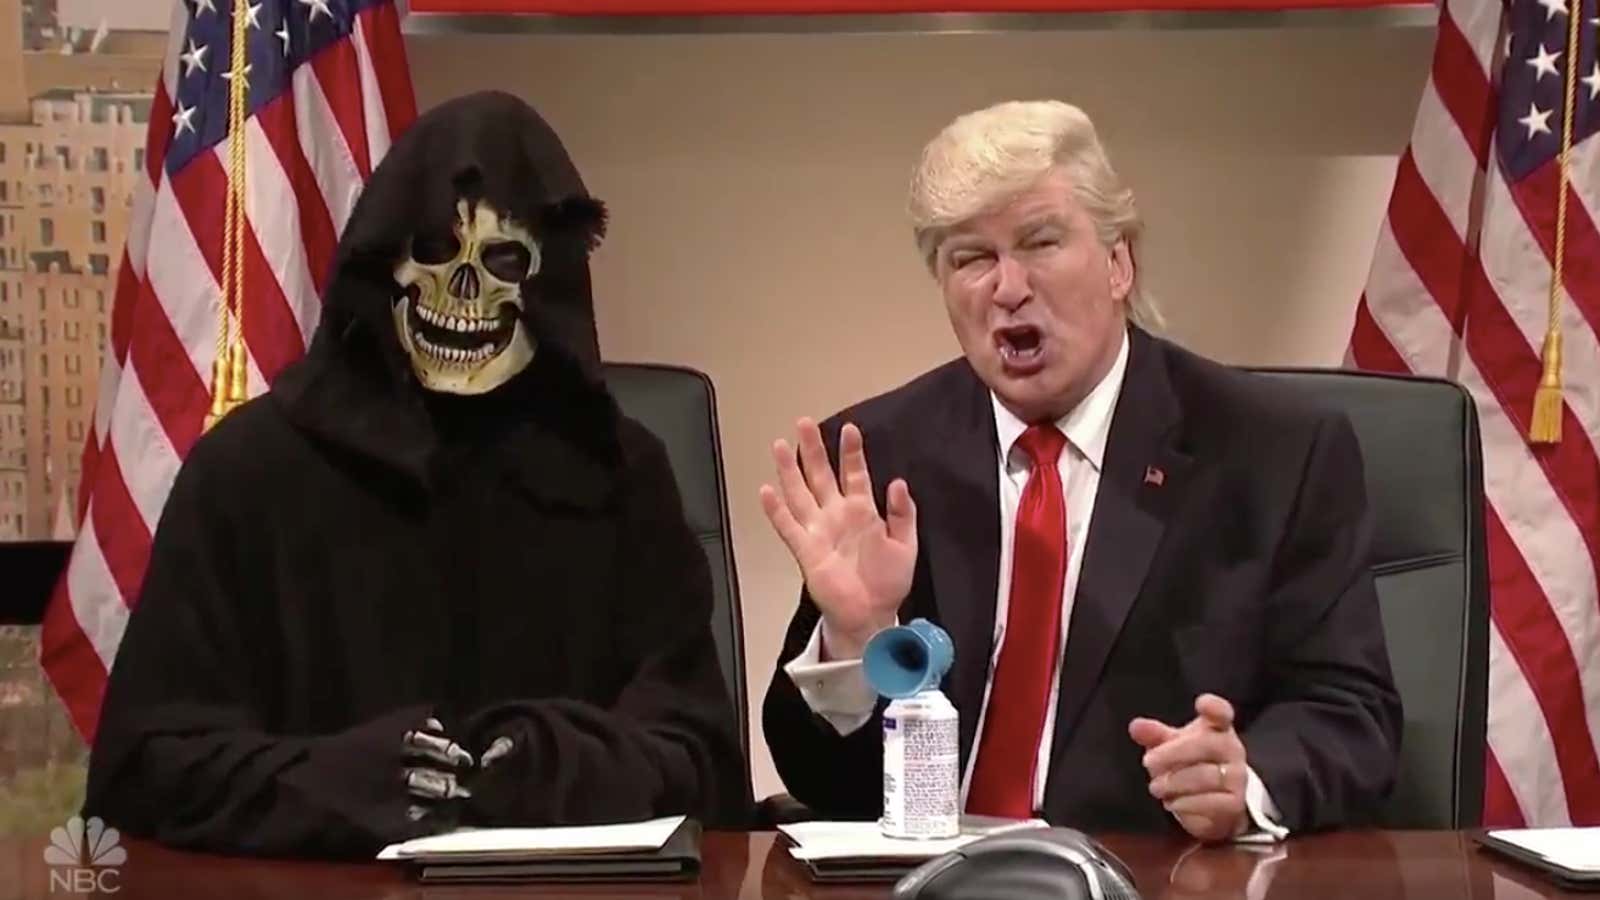 “Saturday Night Live” once again nails the anxieties many feel about a Trump presidency